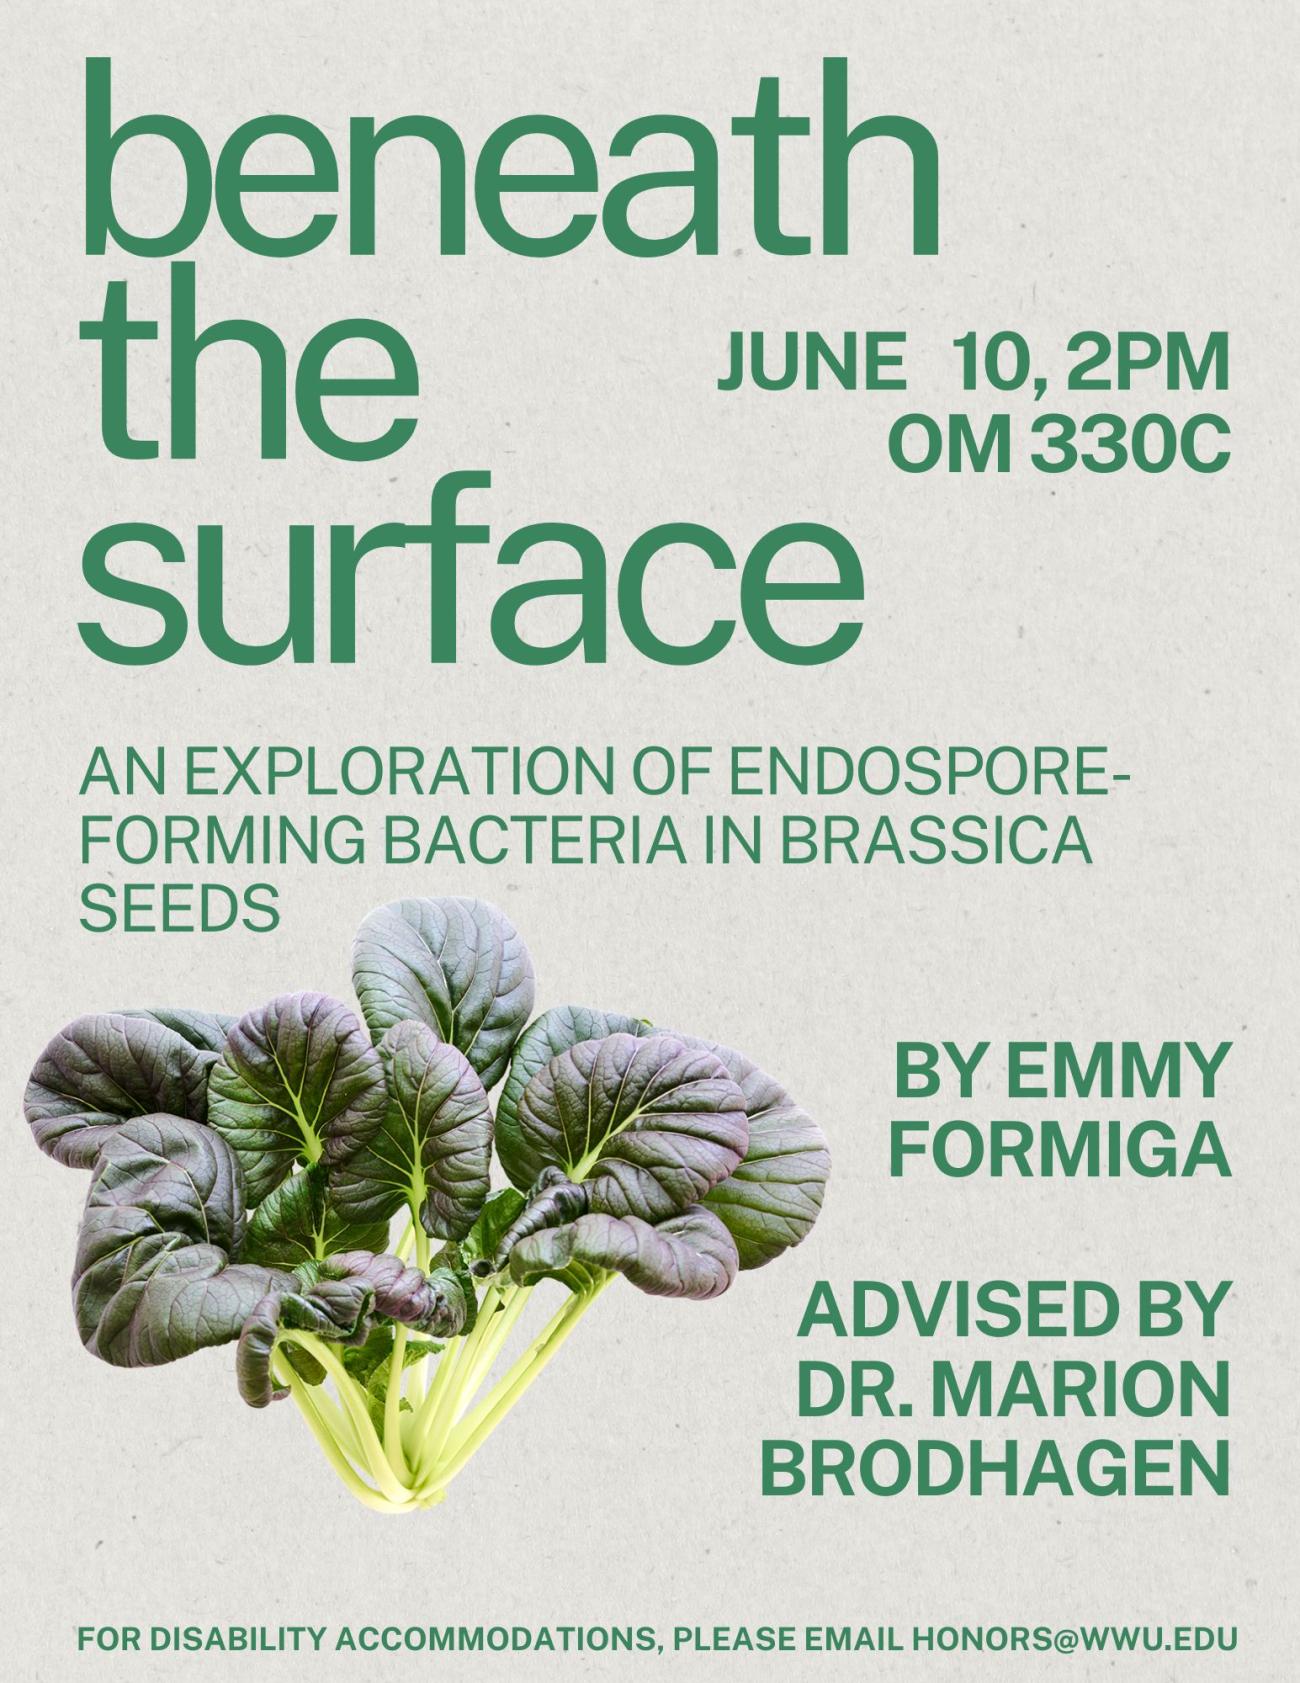 A white poster with an image of a bunch of tatsoi. The text reads "Beneath the Surface: An Exploration of Endospore-Forming Bacteria in Brassica Seeds. June 10th, 2PM, OM 330C. By Emmy Formiga, advised by Dr. Marion Brodhagen. For disability accommodations, please email honors@wwu.edu."